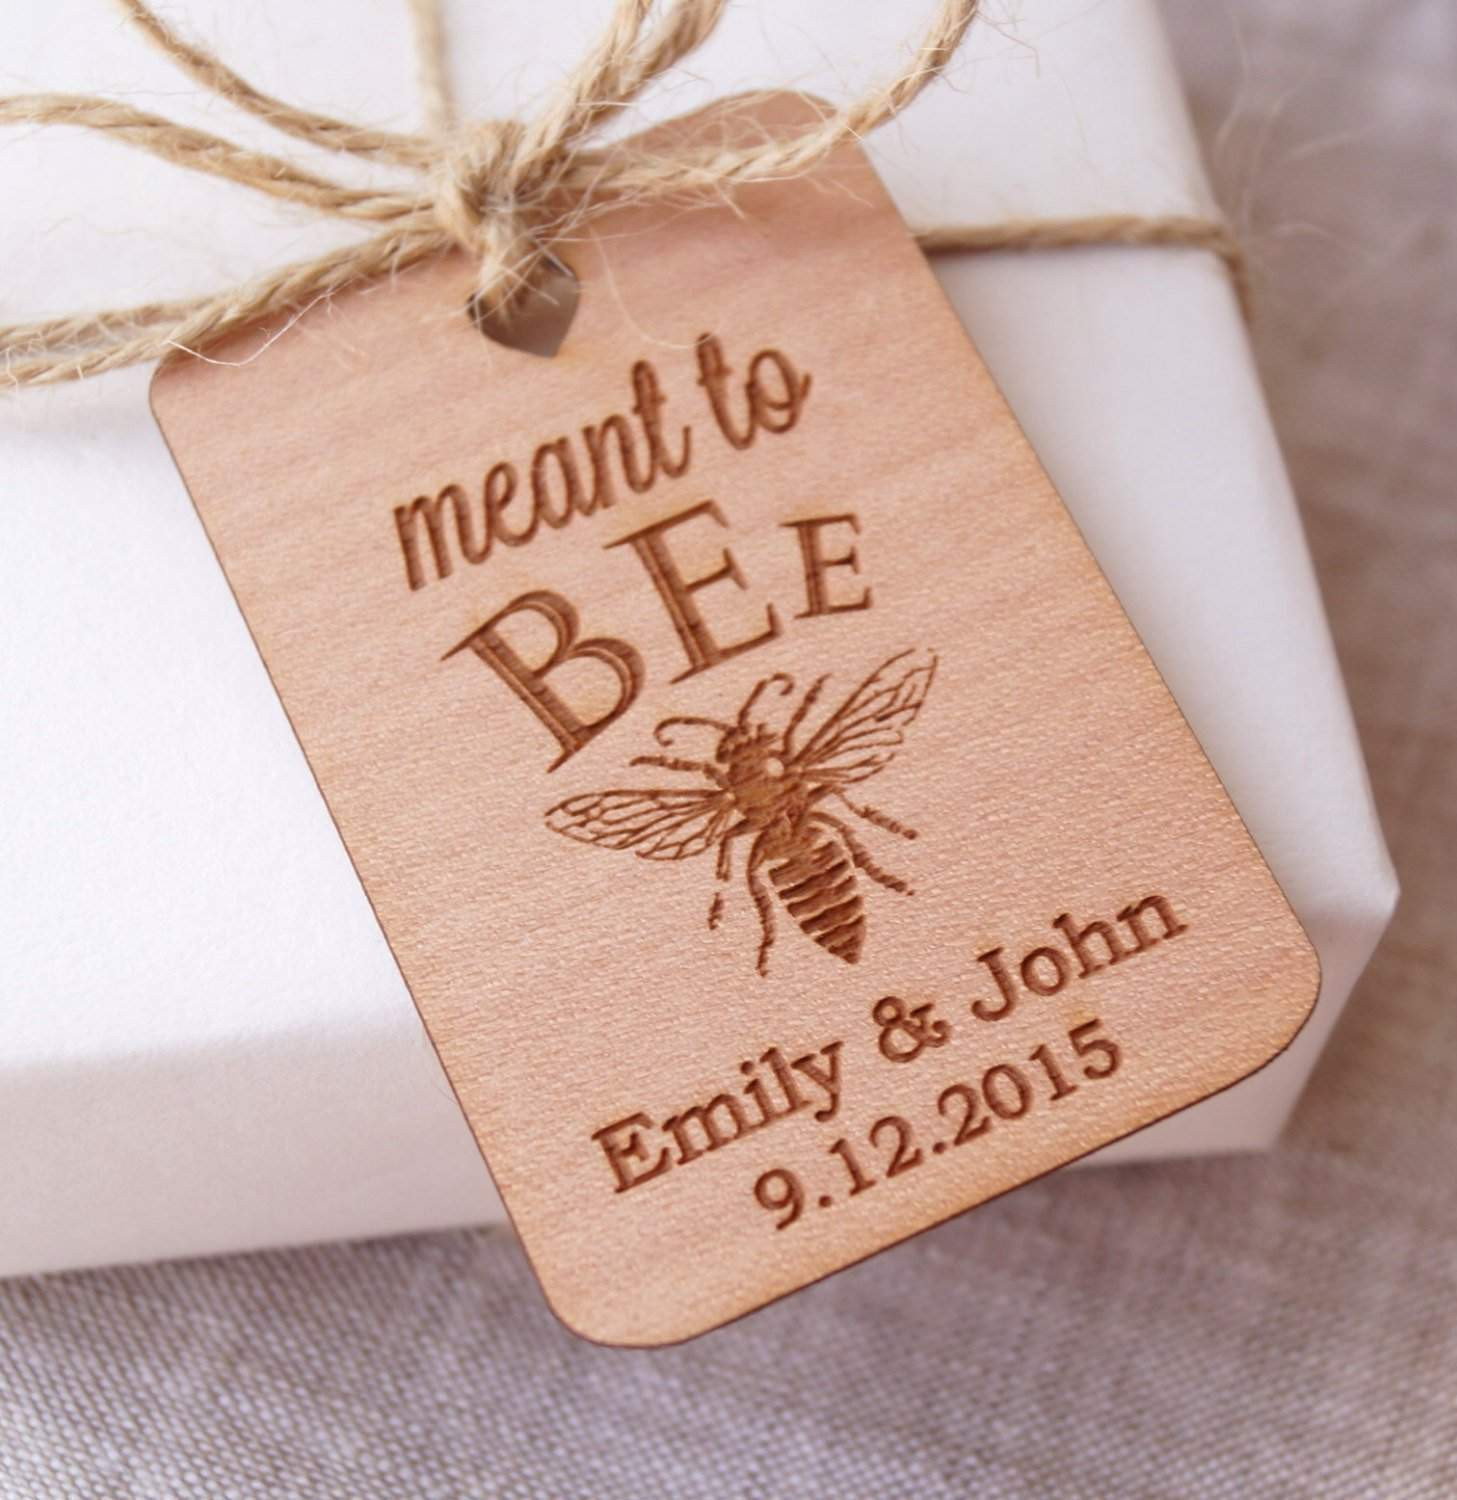 Personalized Wedding Favors
 Top 10 Best Personalized Wedding Favor Ideas